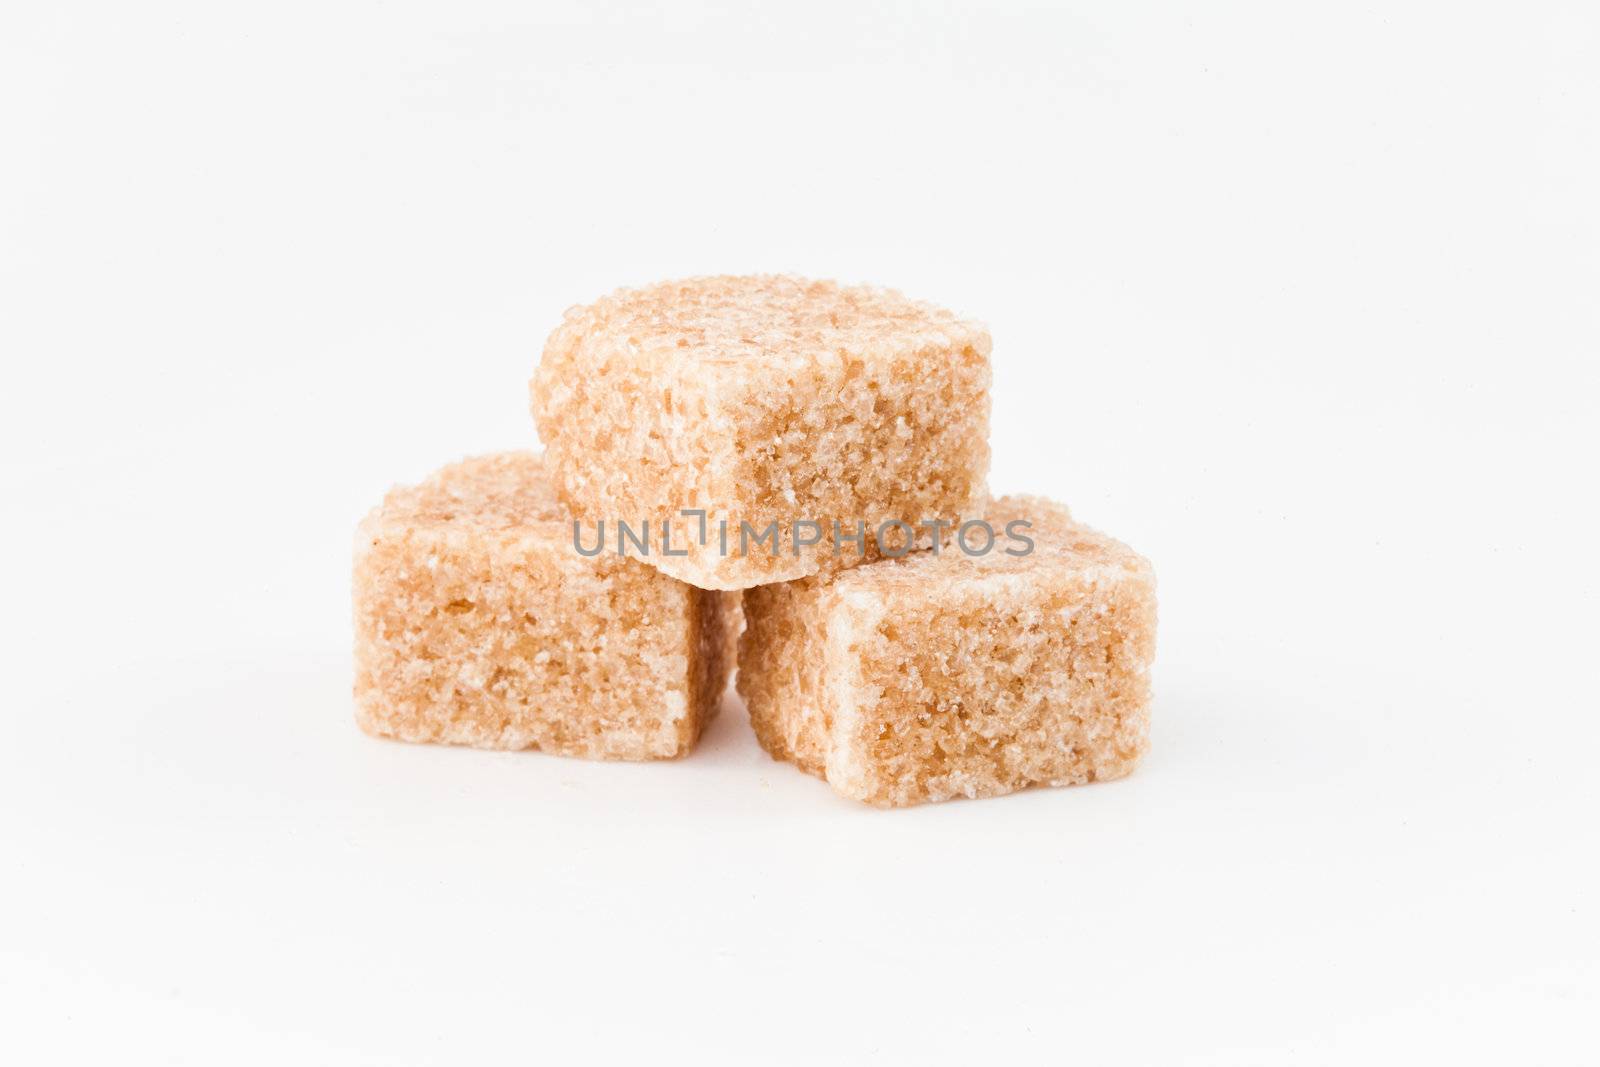 Brown sugars against a white background